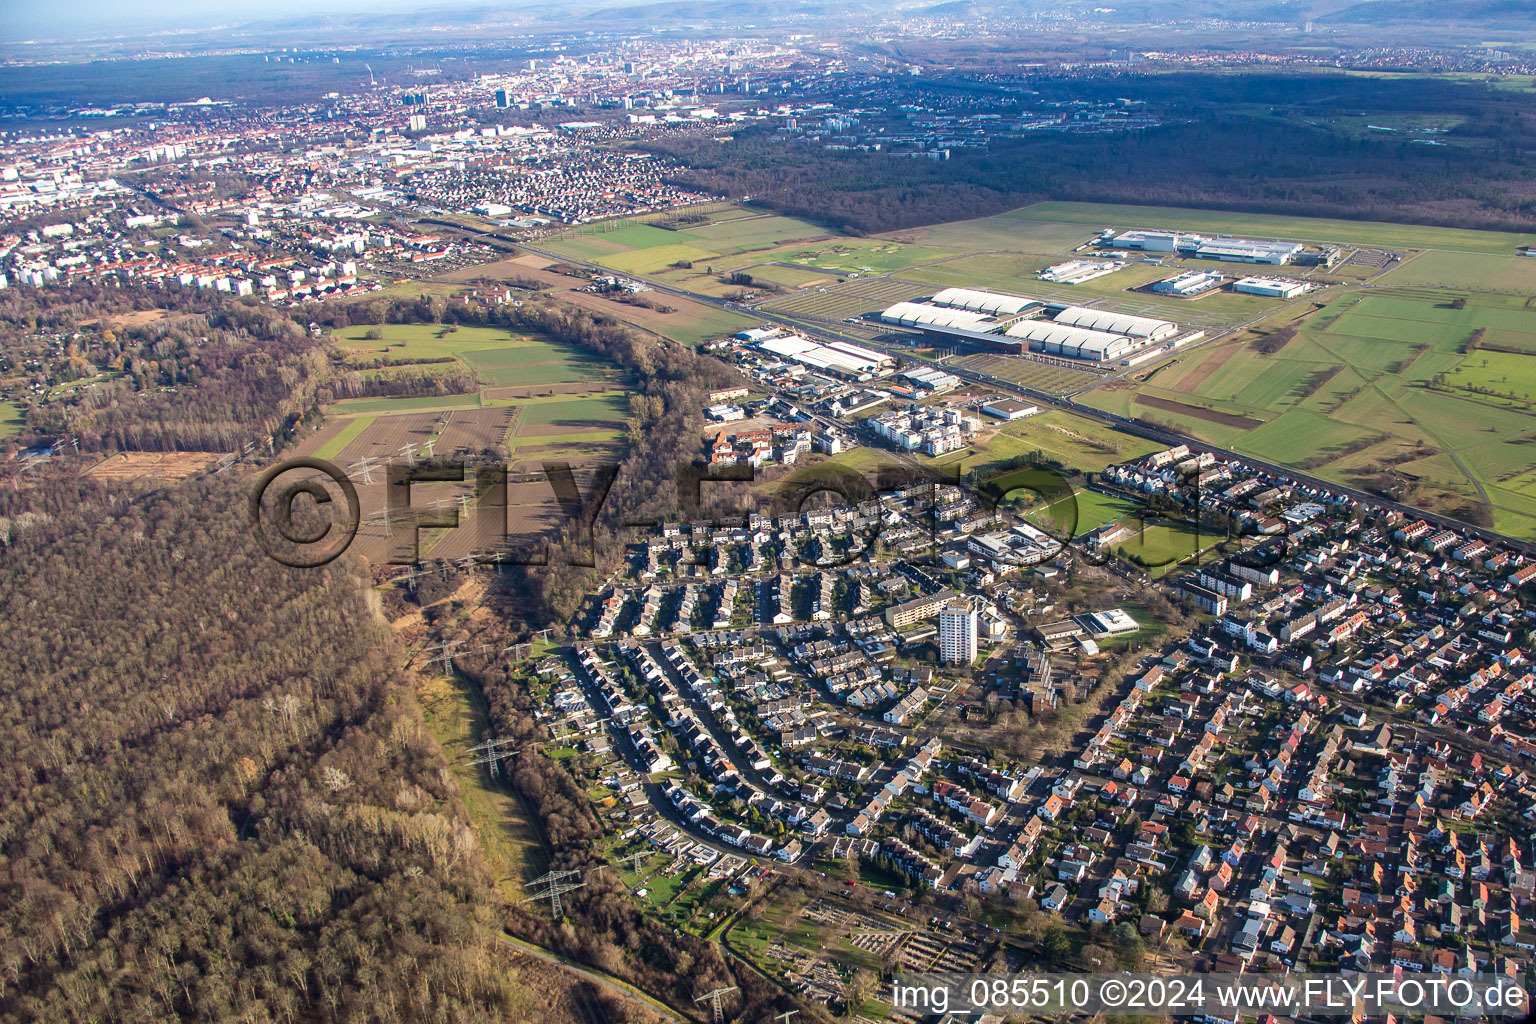 Aerial photograpy of From the southwest in the district Forchheim in Rheinstetten in the state Baden-Wuerttemberg, Germany